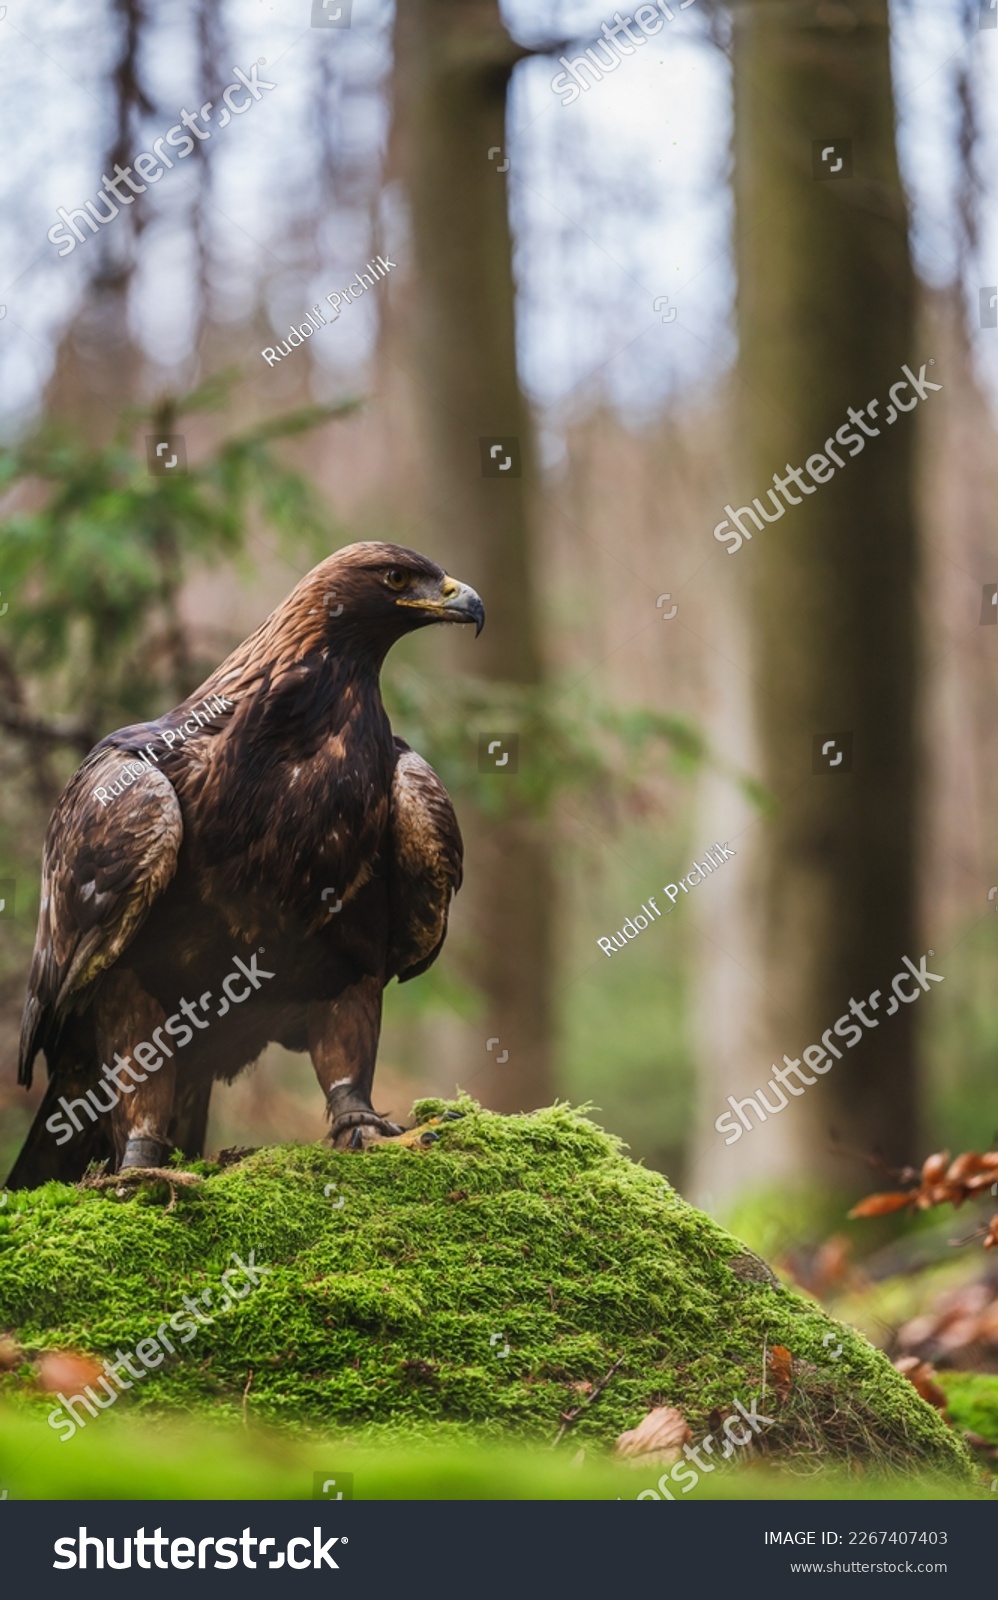 Golden eagle (Aquila chrysaetos) is one of the best-known birds of prey . It is the most widely distributed species of eagle. Autumn forest #2267407403